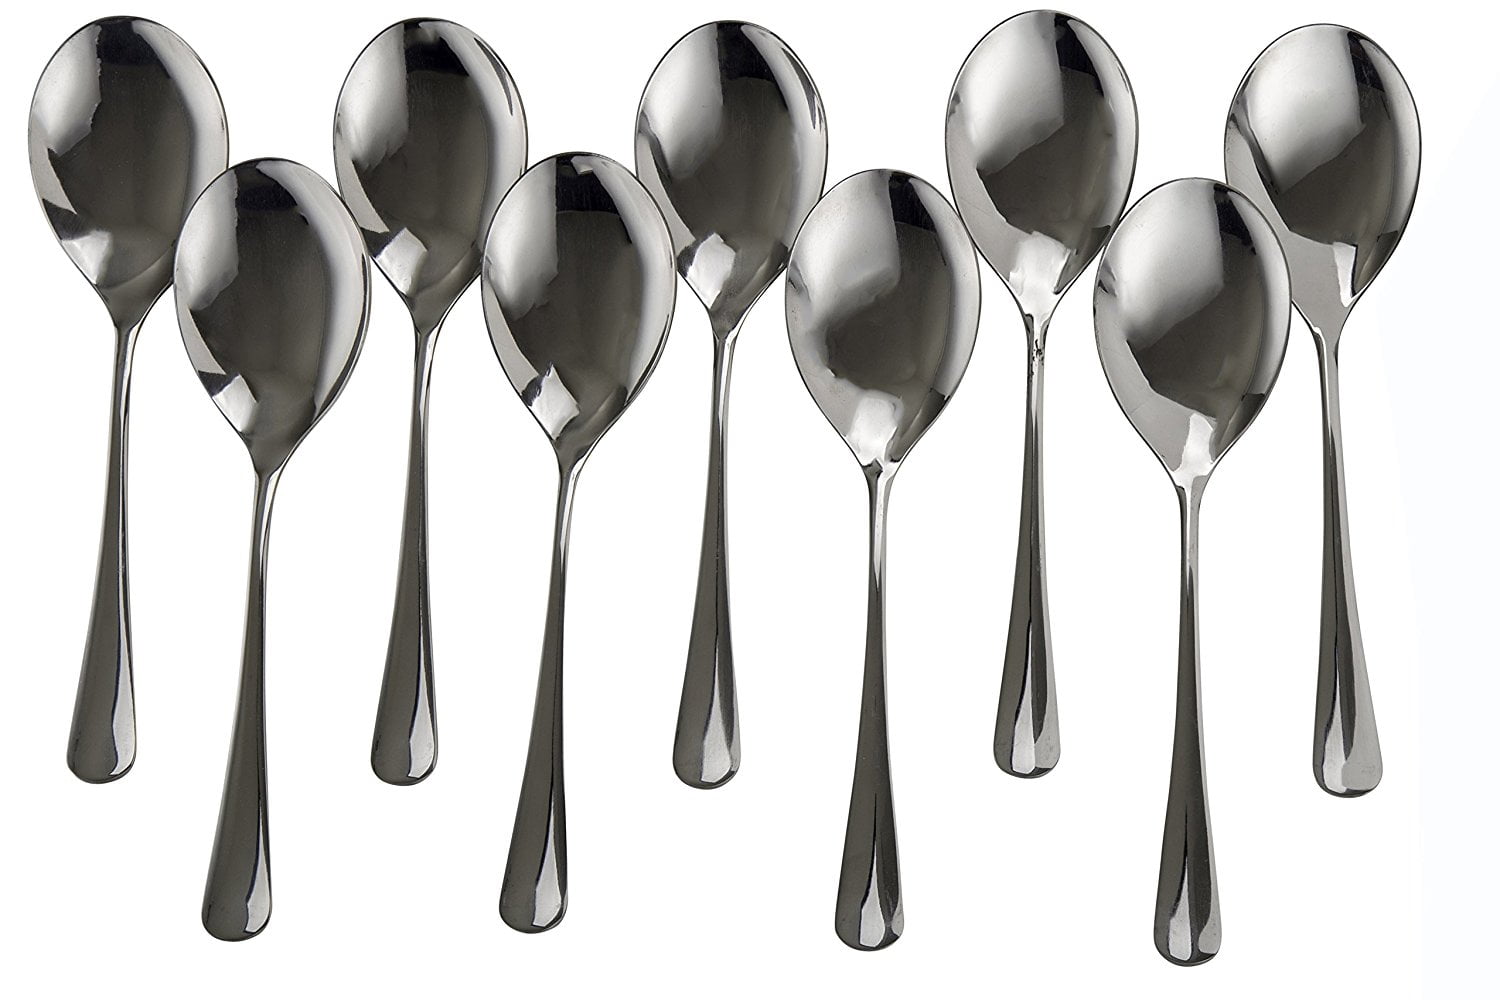 Set of 2 Stainless Steel Large Serving Spoon Buffet & Banquet Style High Polish Finish By Kitchen Winners 10 inch 